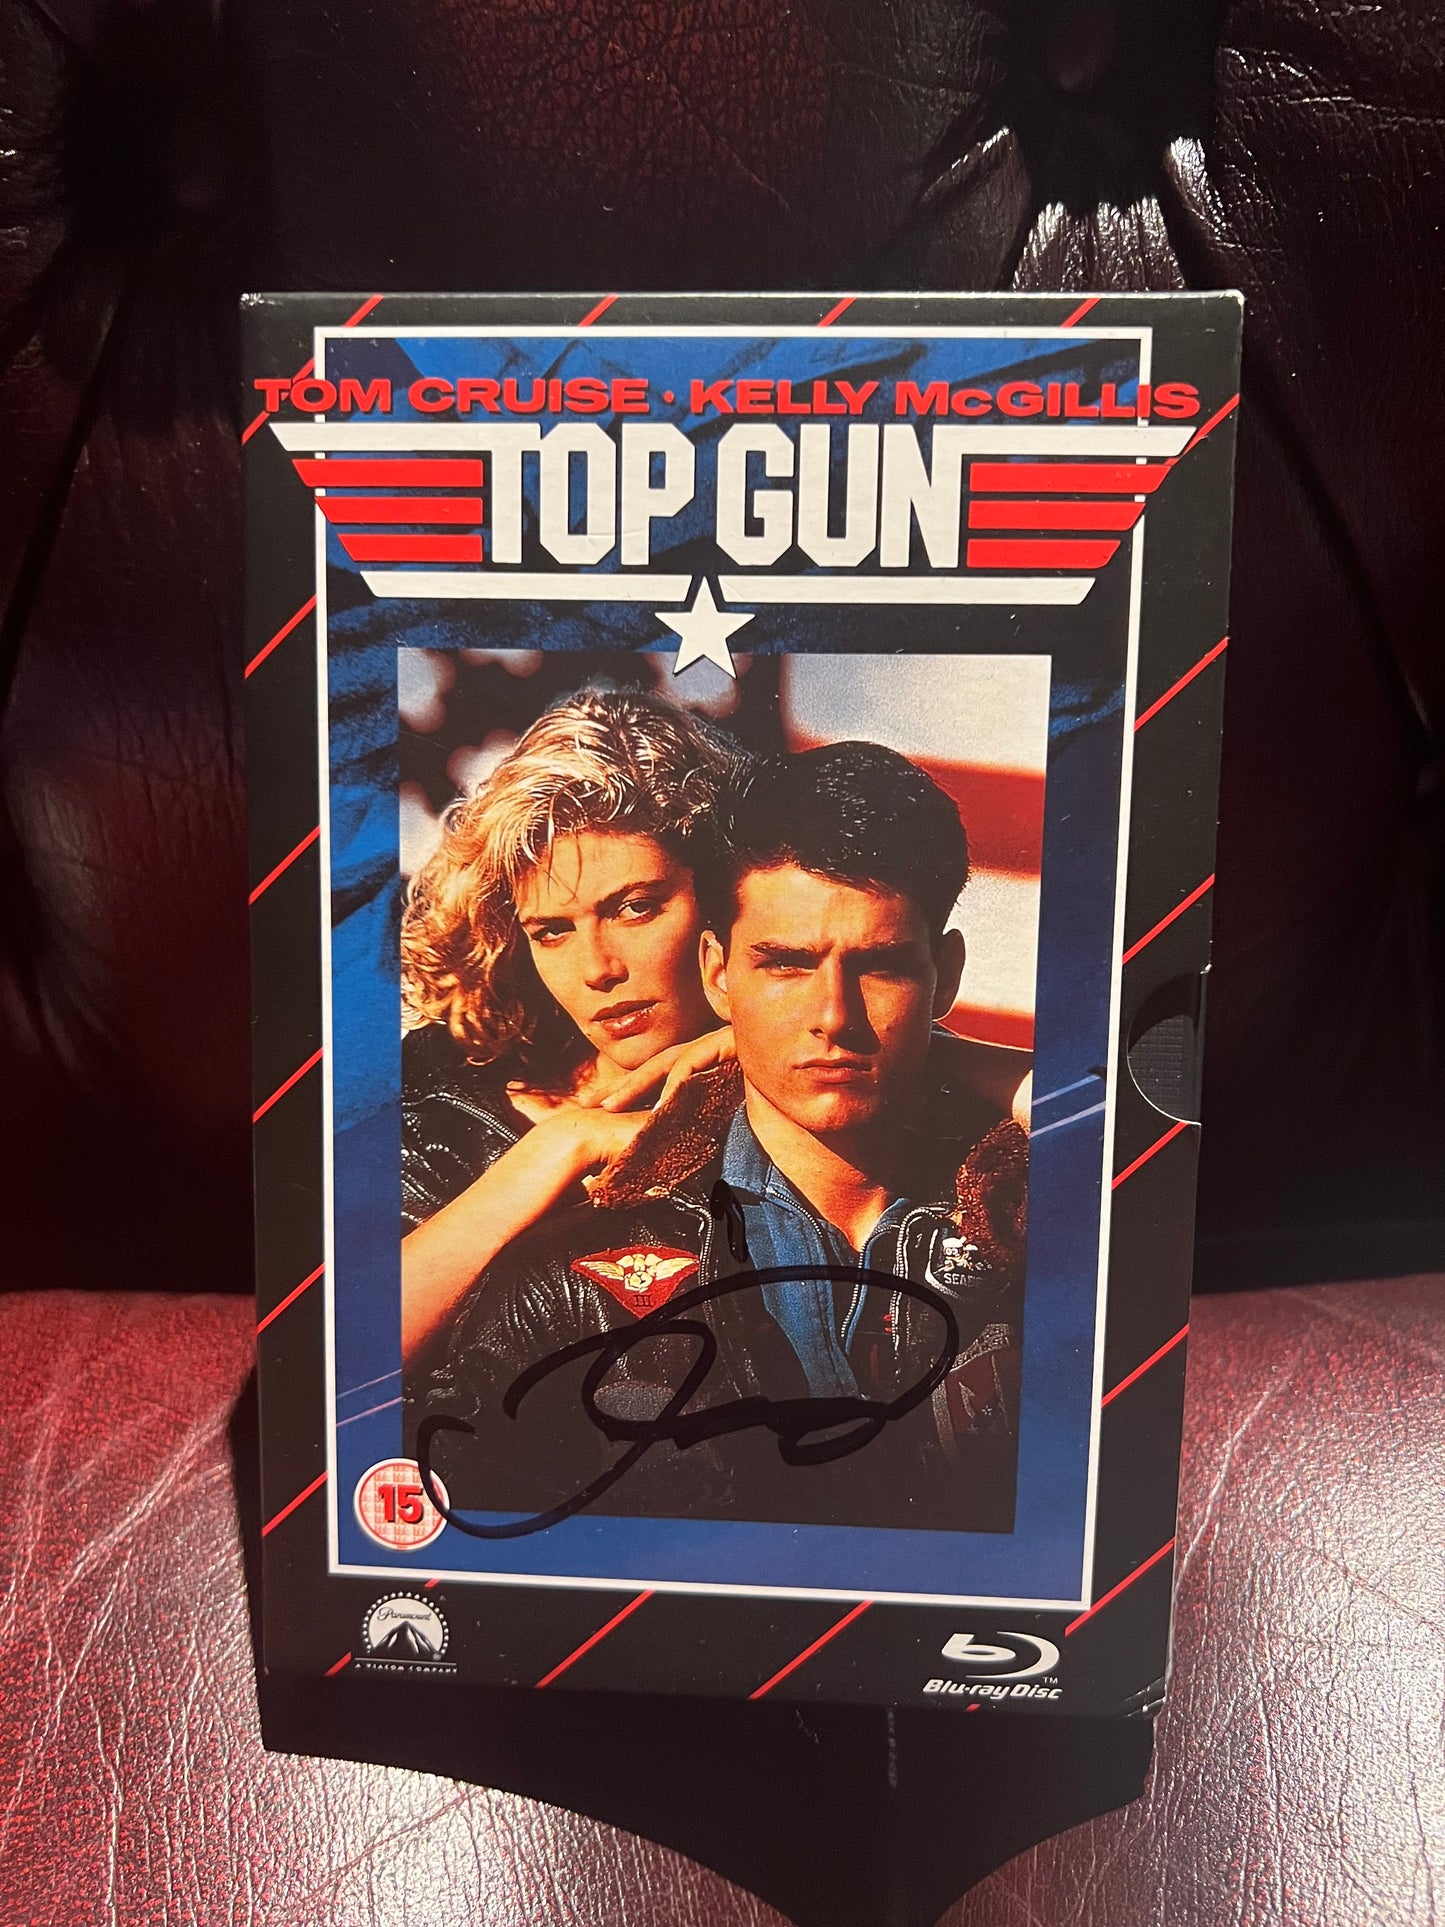 Signed Tom Cruise Limited Edition HMV Exclusive Top Gun VHS Boxed Blu-Ray